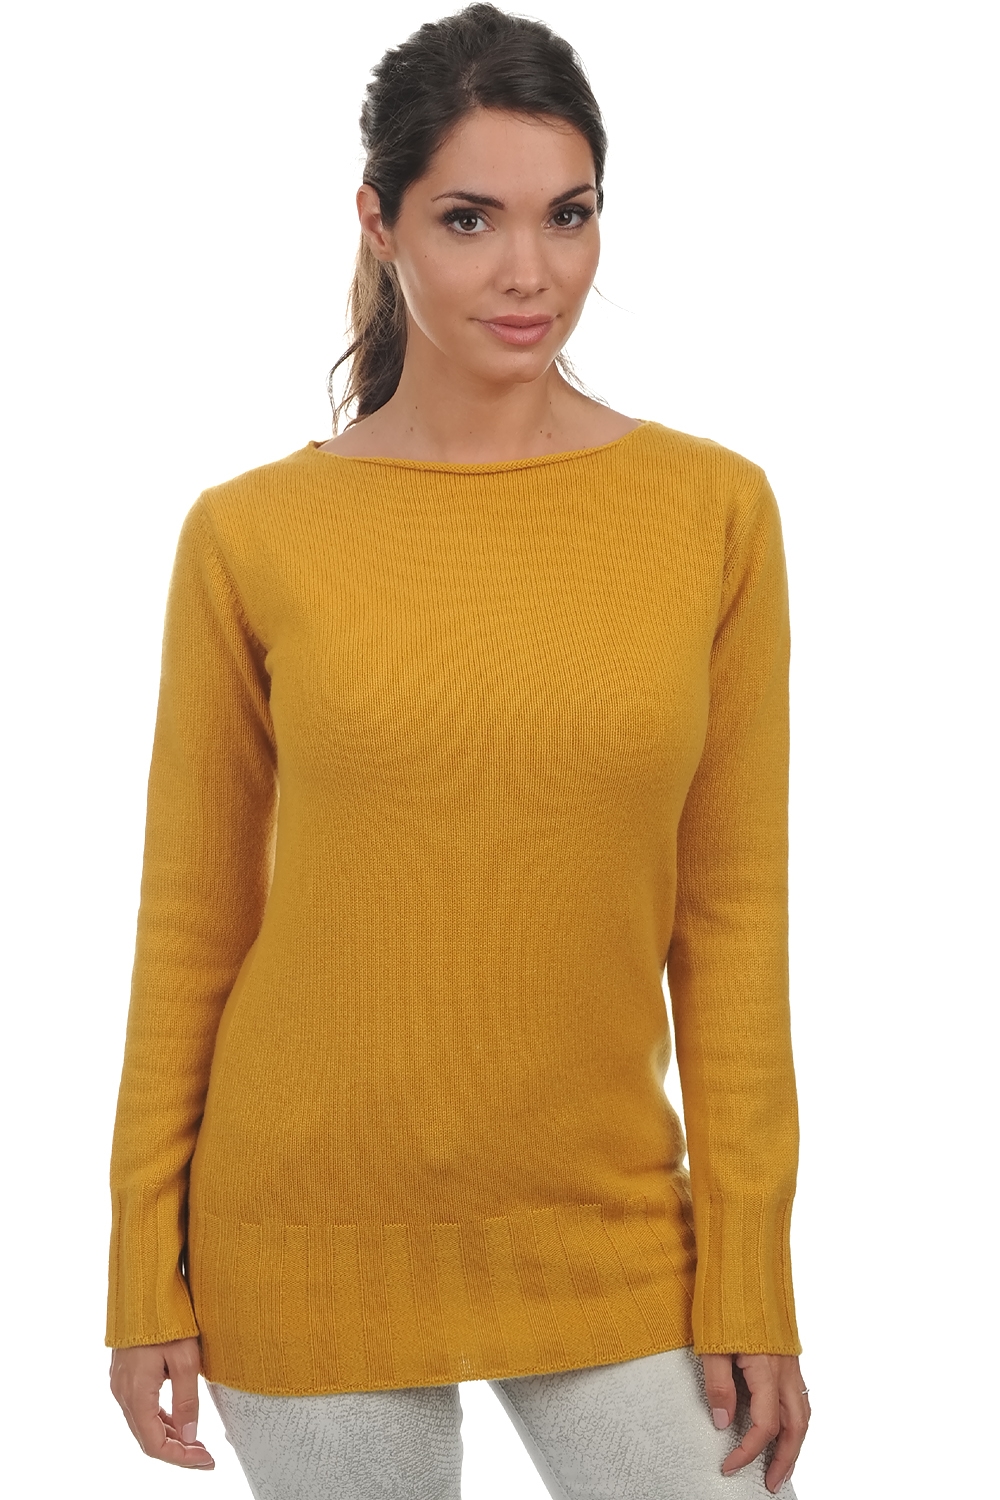 Cashmere ladies chunky sweater july mustard 3xl